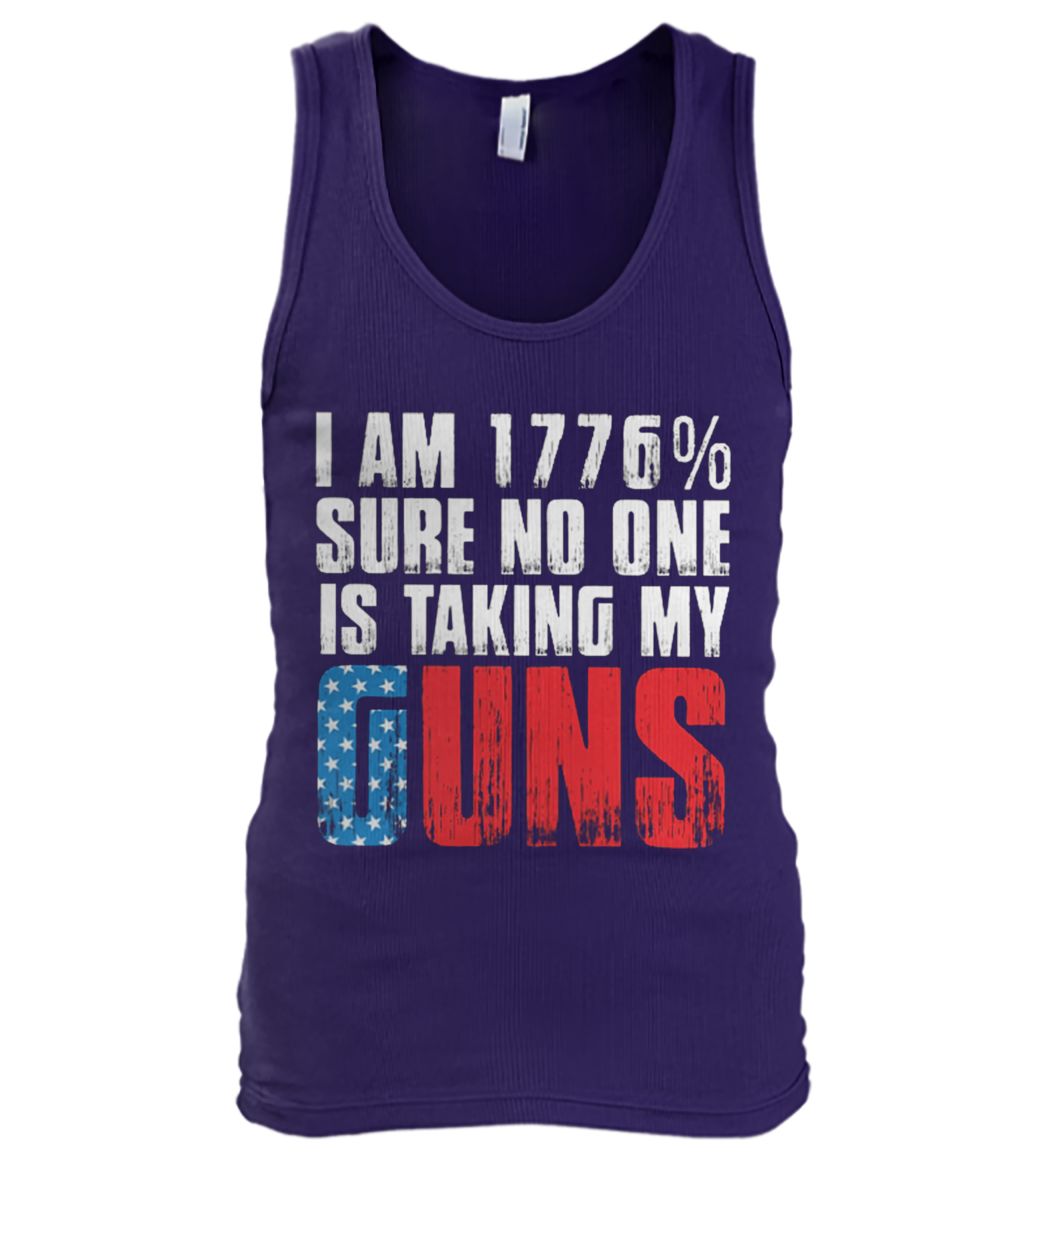 I am 1776% sure no one is taking my guns men's tank top